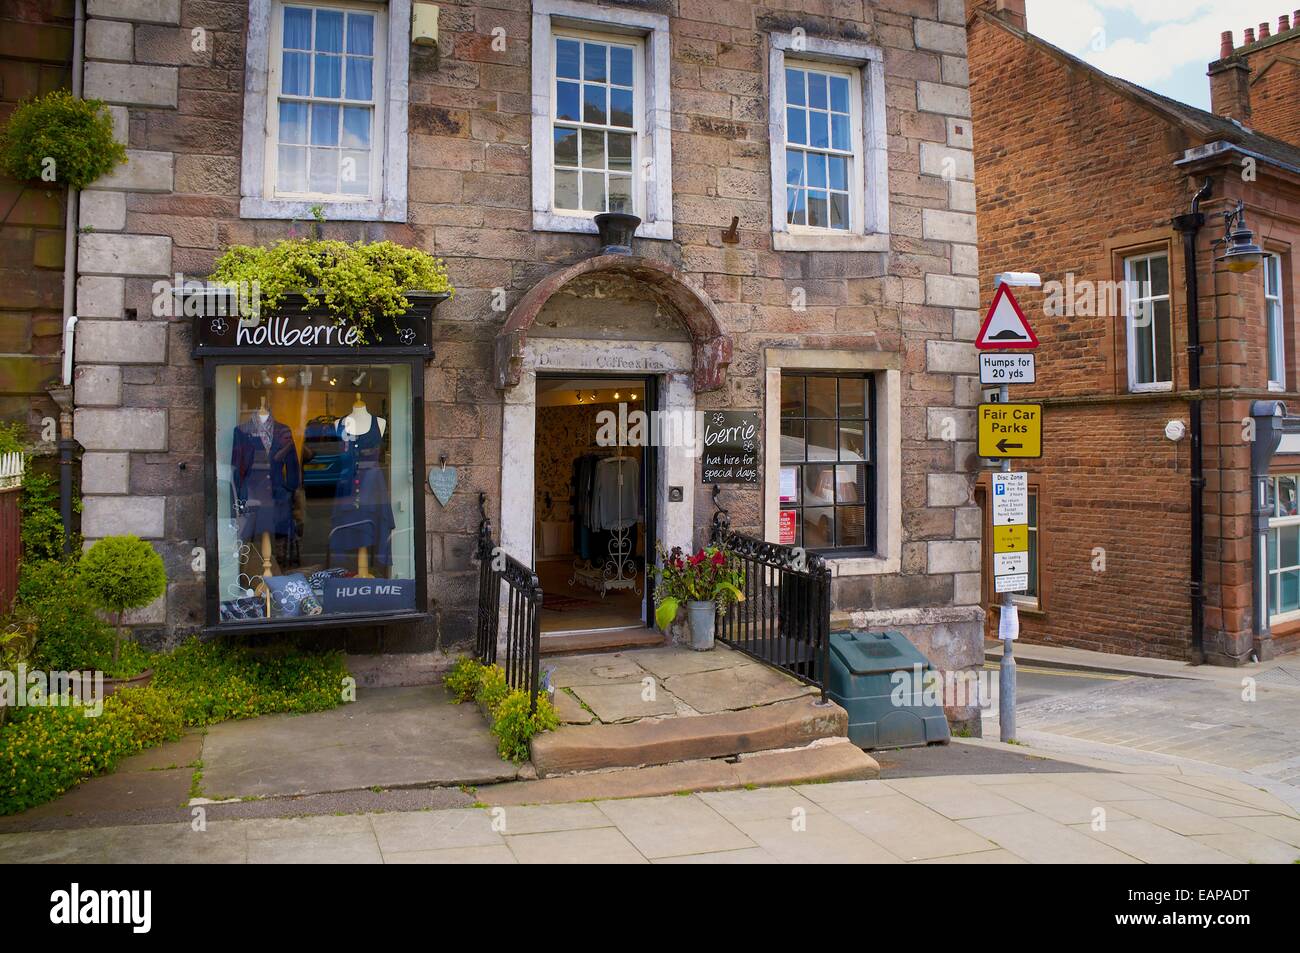 Old shop in market town of Appleby-in-Westmorland, Cumbria, England, United Kingdom. Stock Photo